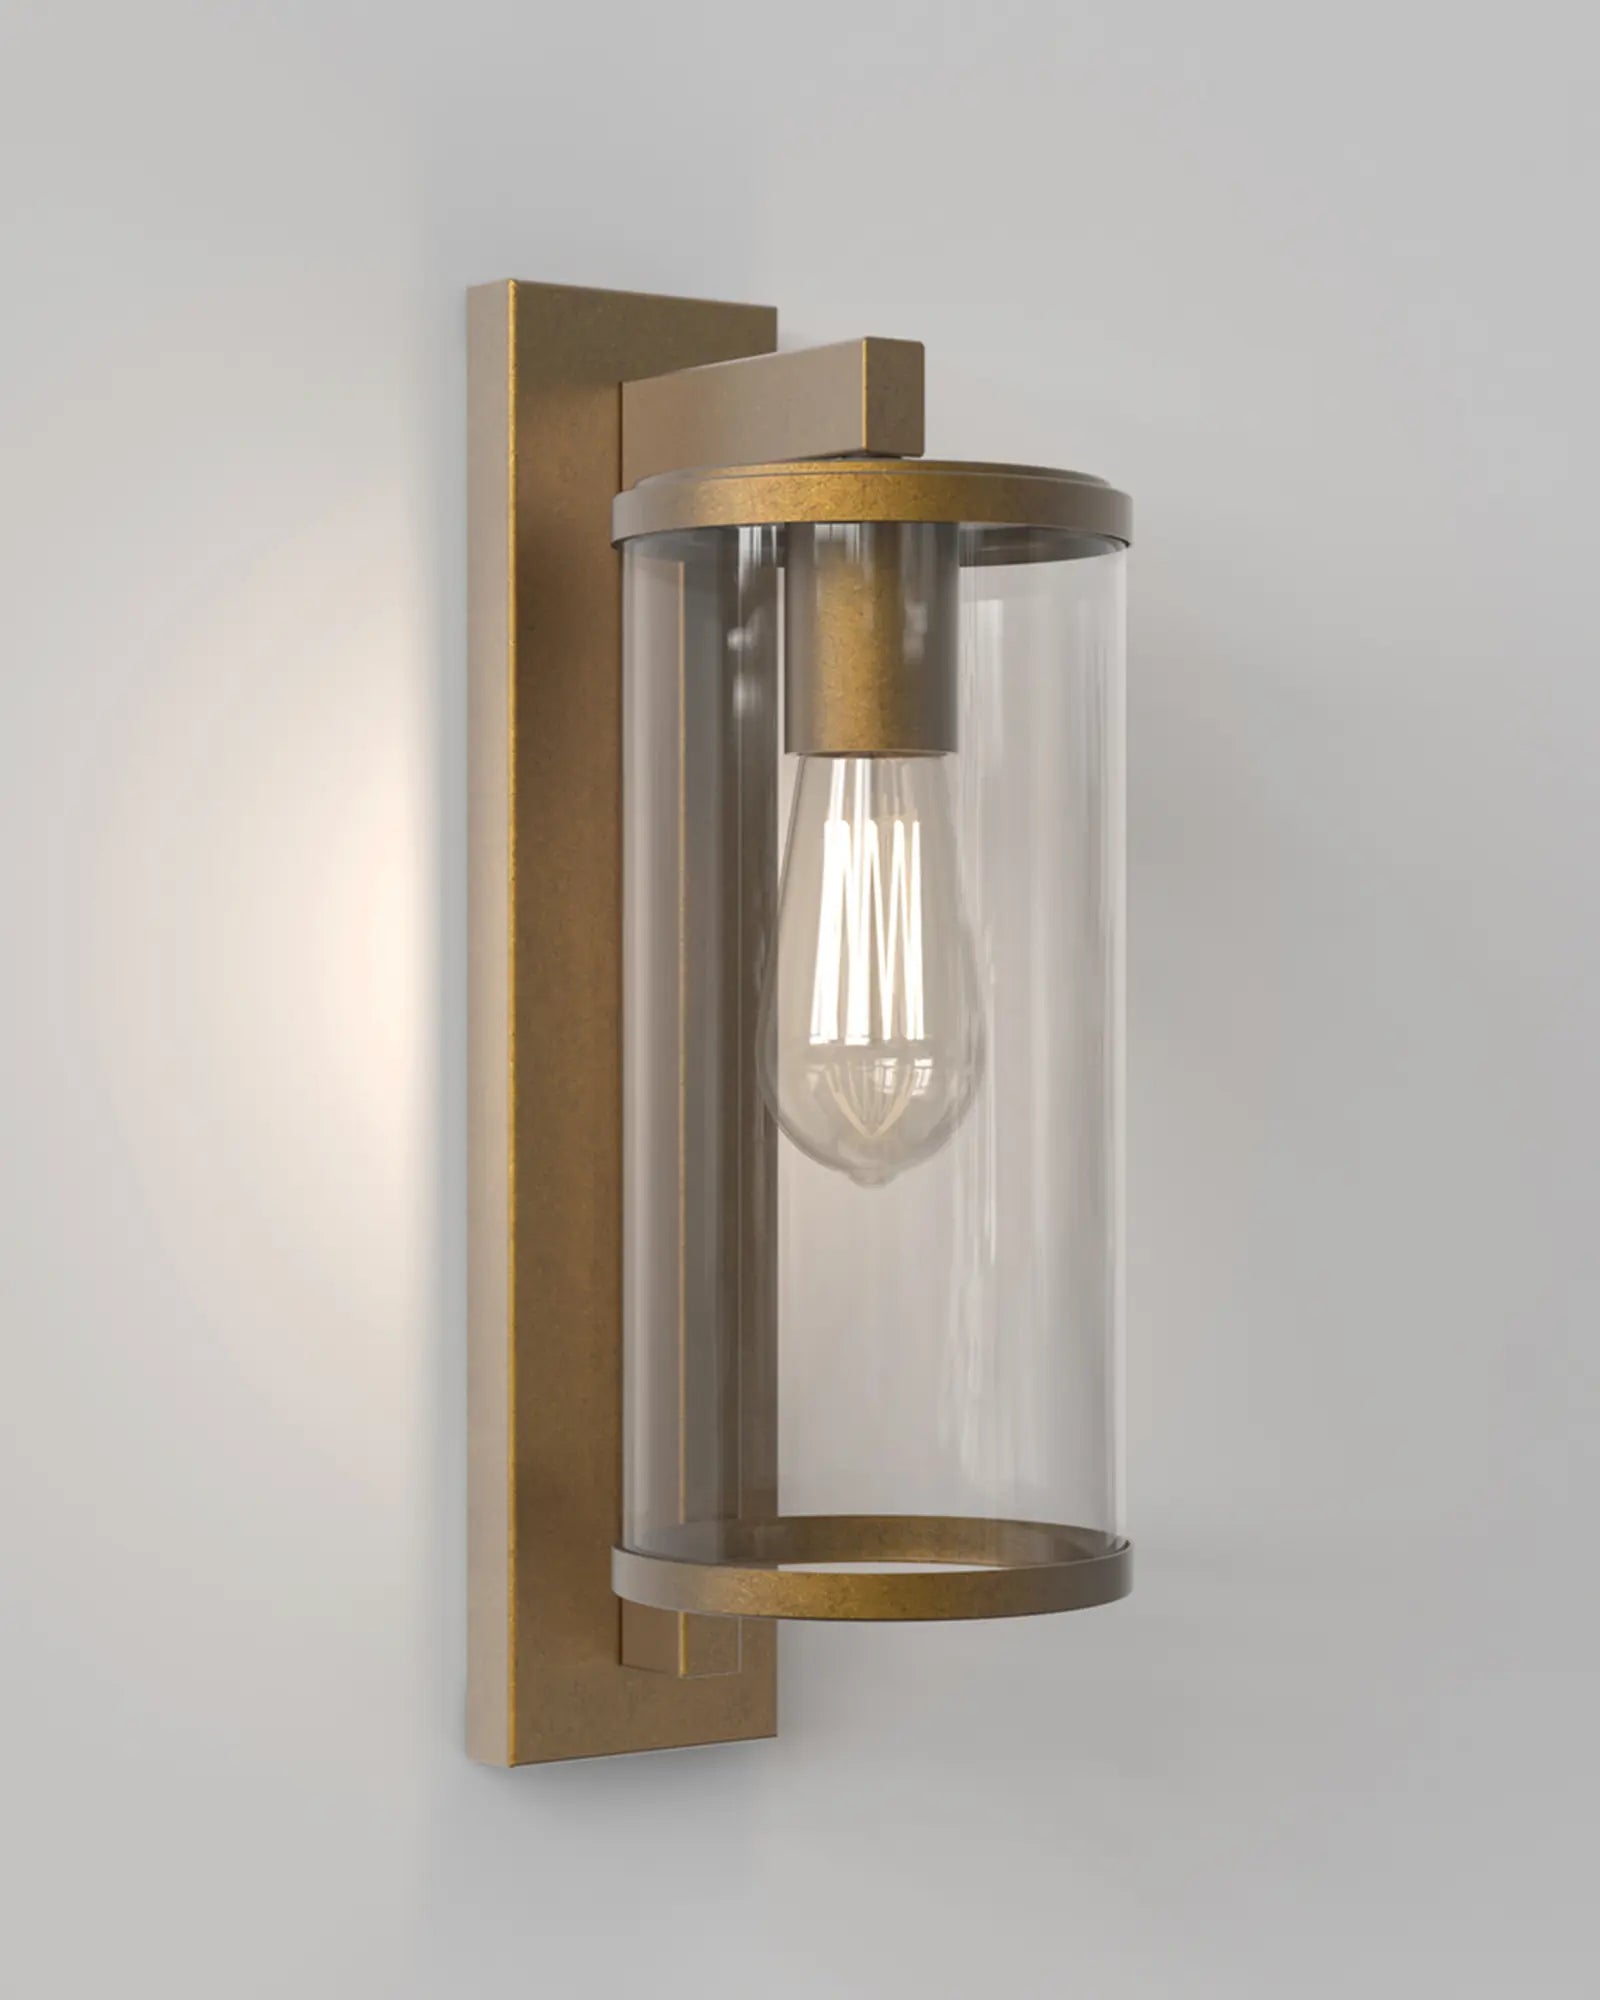 Pimlico Outdoor lantern style metal and glass wall light brass 400